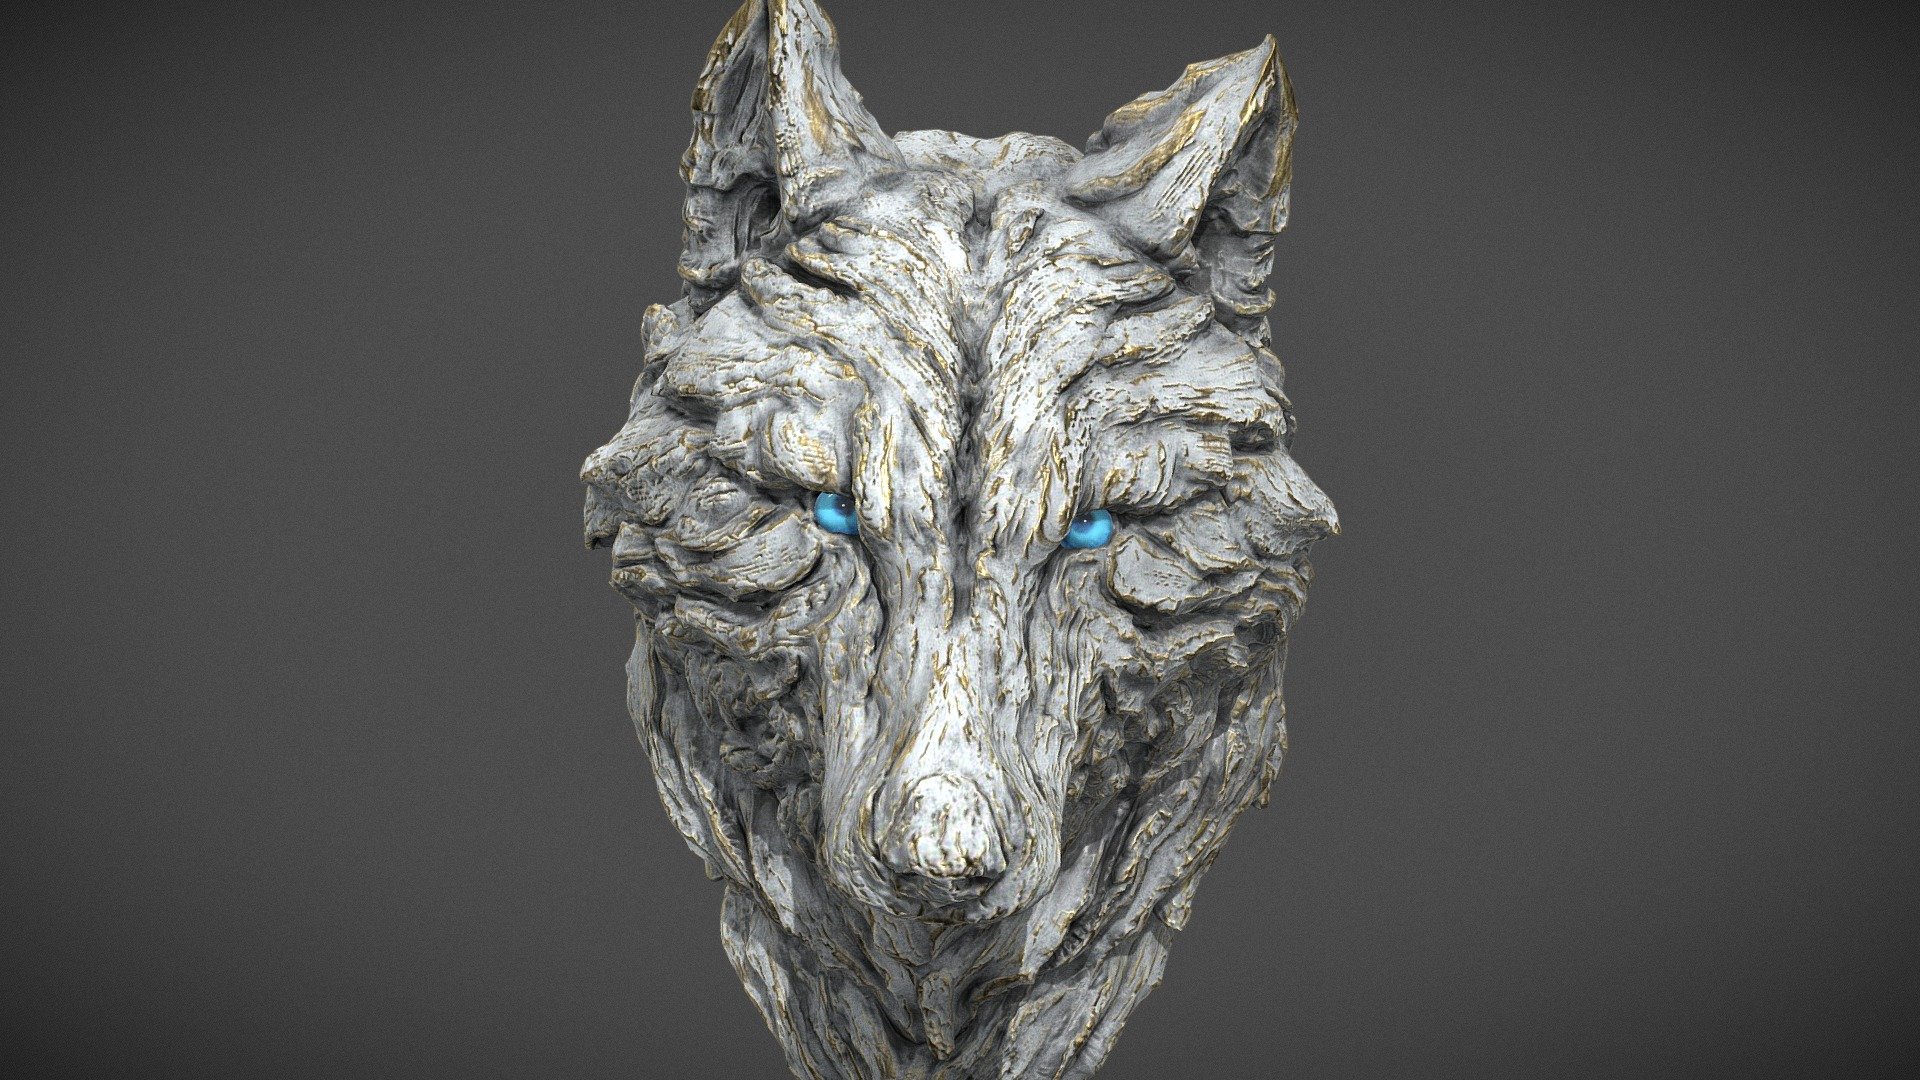 zbrushで手彫りっぽくスカルプトした狼の頭。

A wolf head sculpted like hand-carved with zbrush 3d model